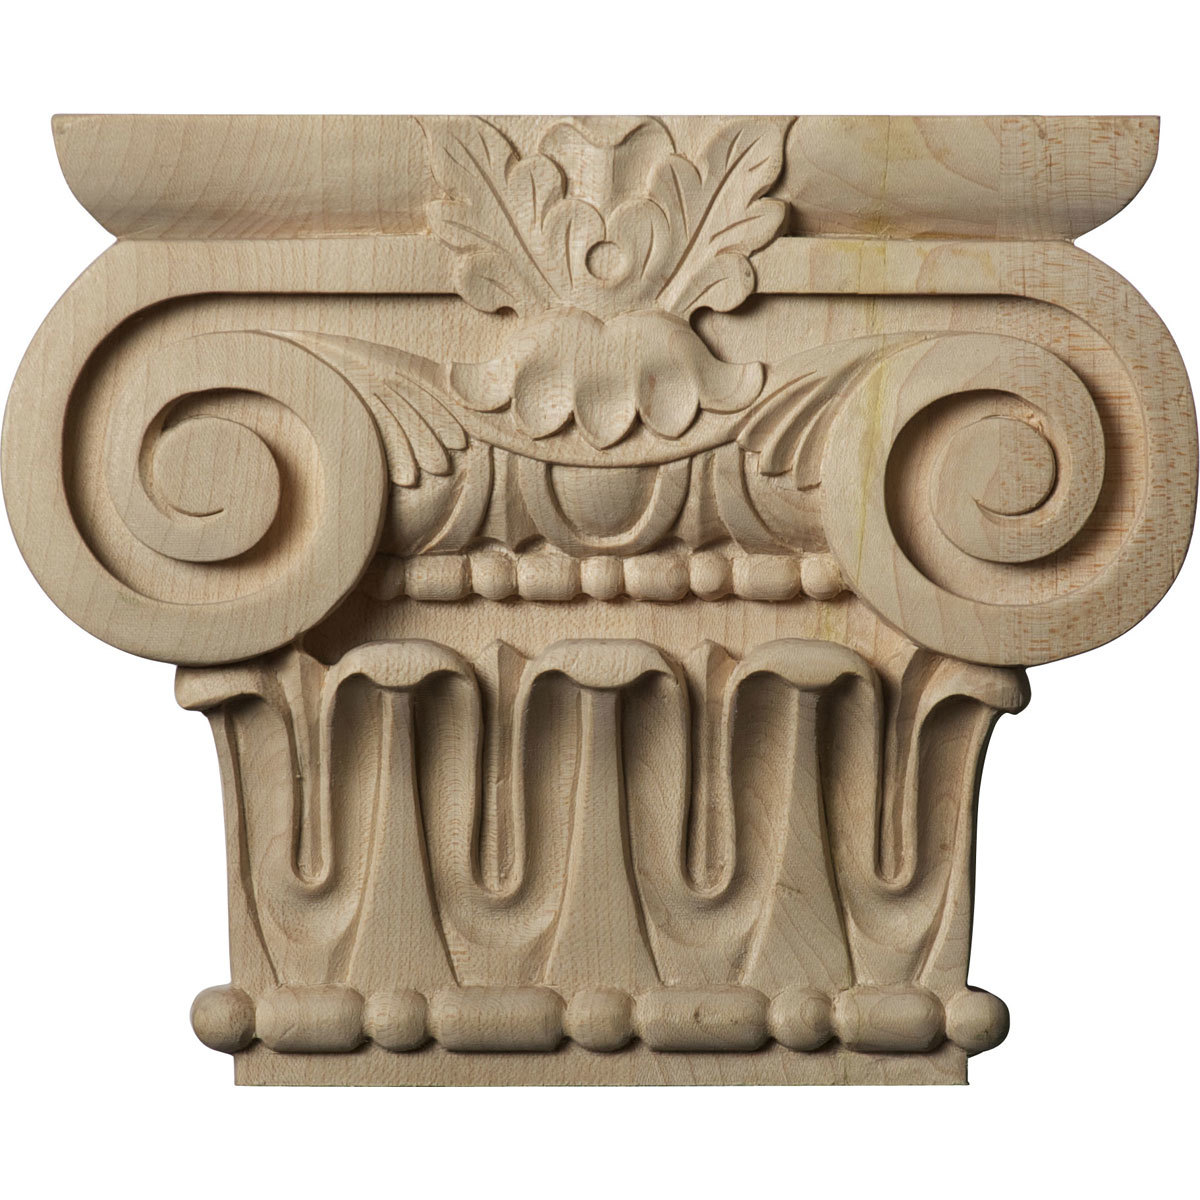 Primary image for 7"W x 3 7/8"BW x 2"D x 5 5/8"H Small Bradford Roman Ionic Capital (Fits Pilaster